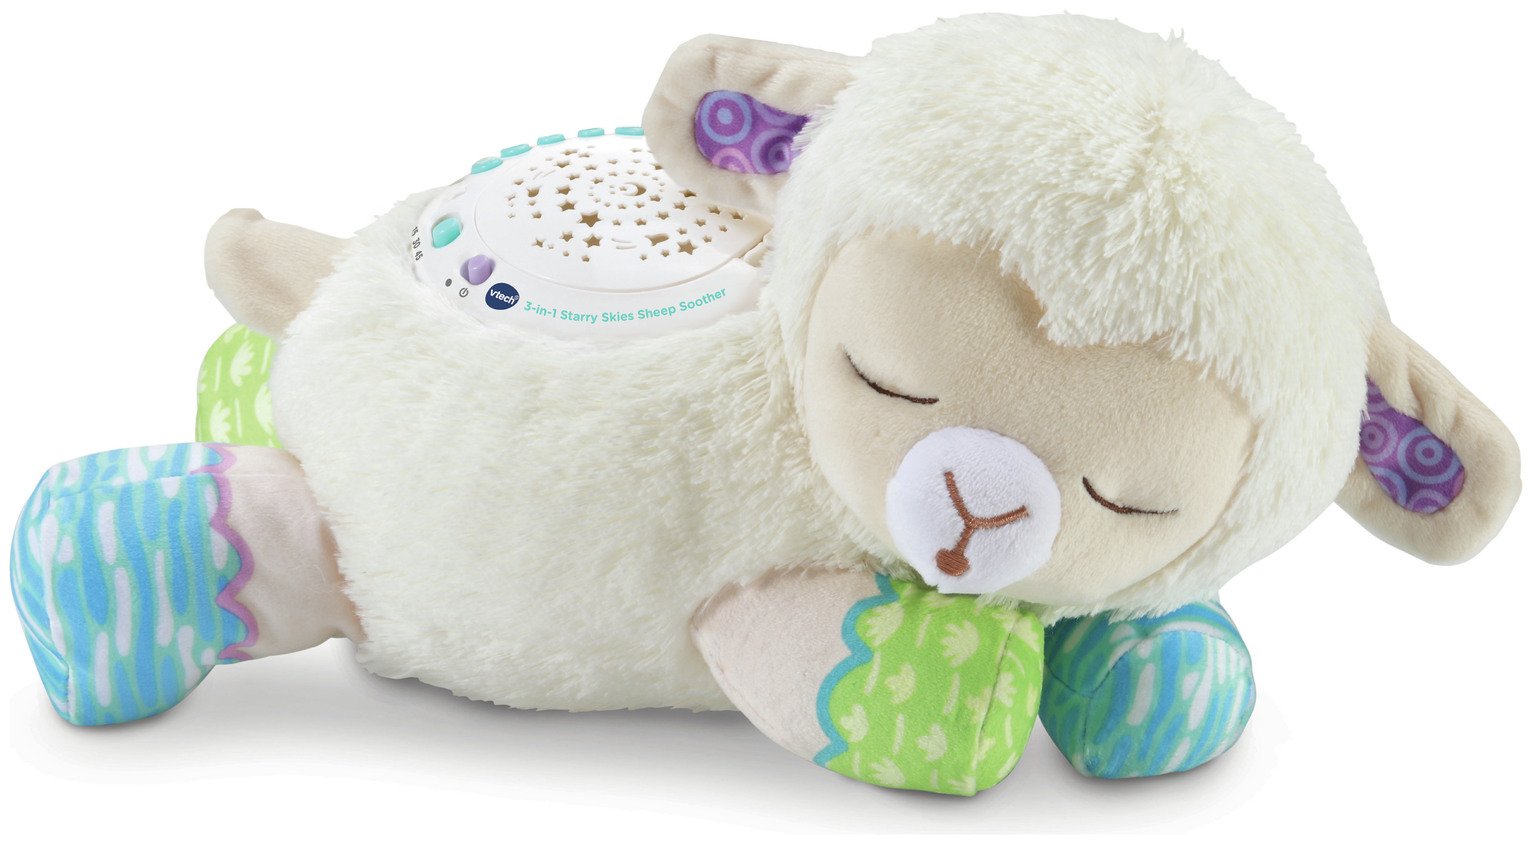 Vtech 3 In 1 Starry Skies Sheep Soother review